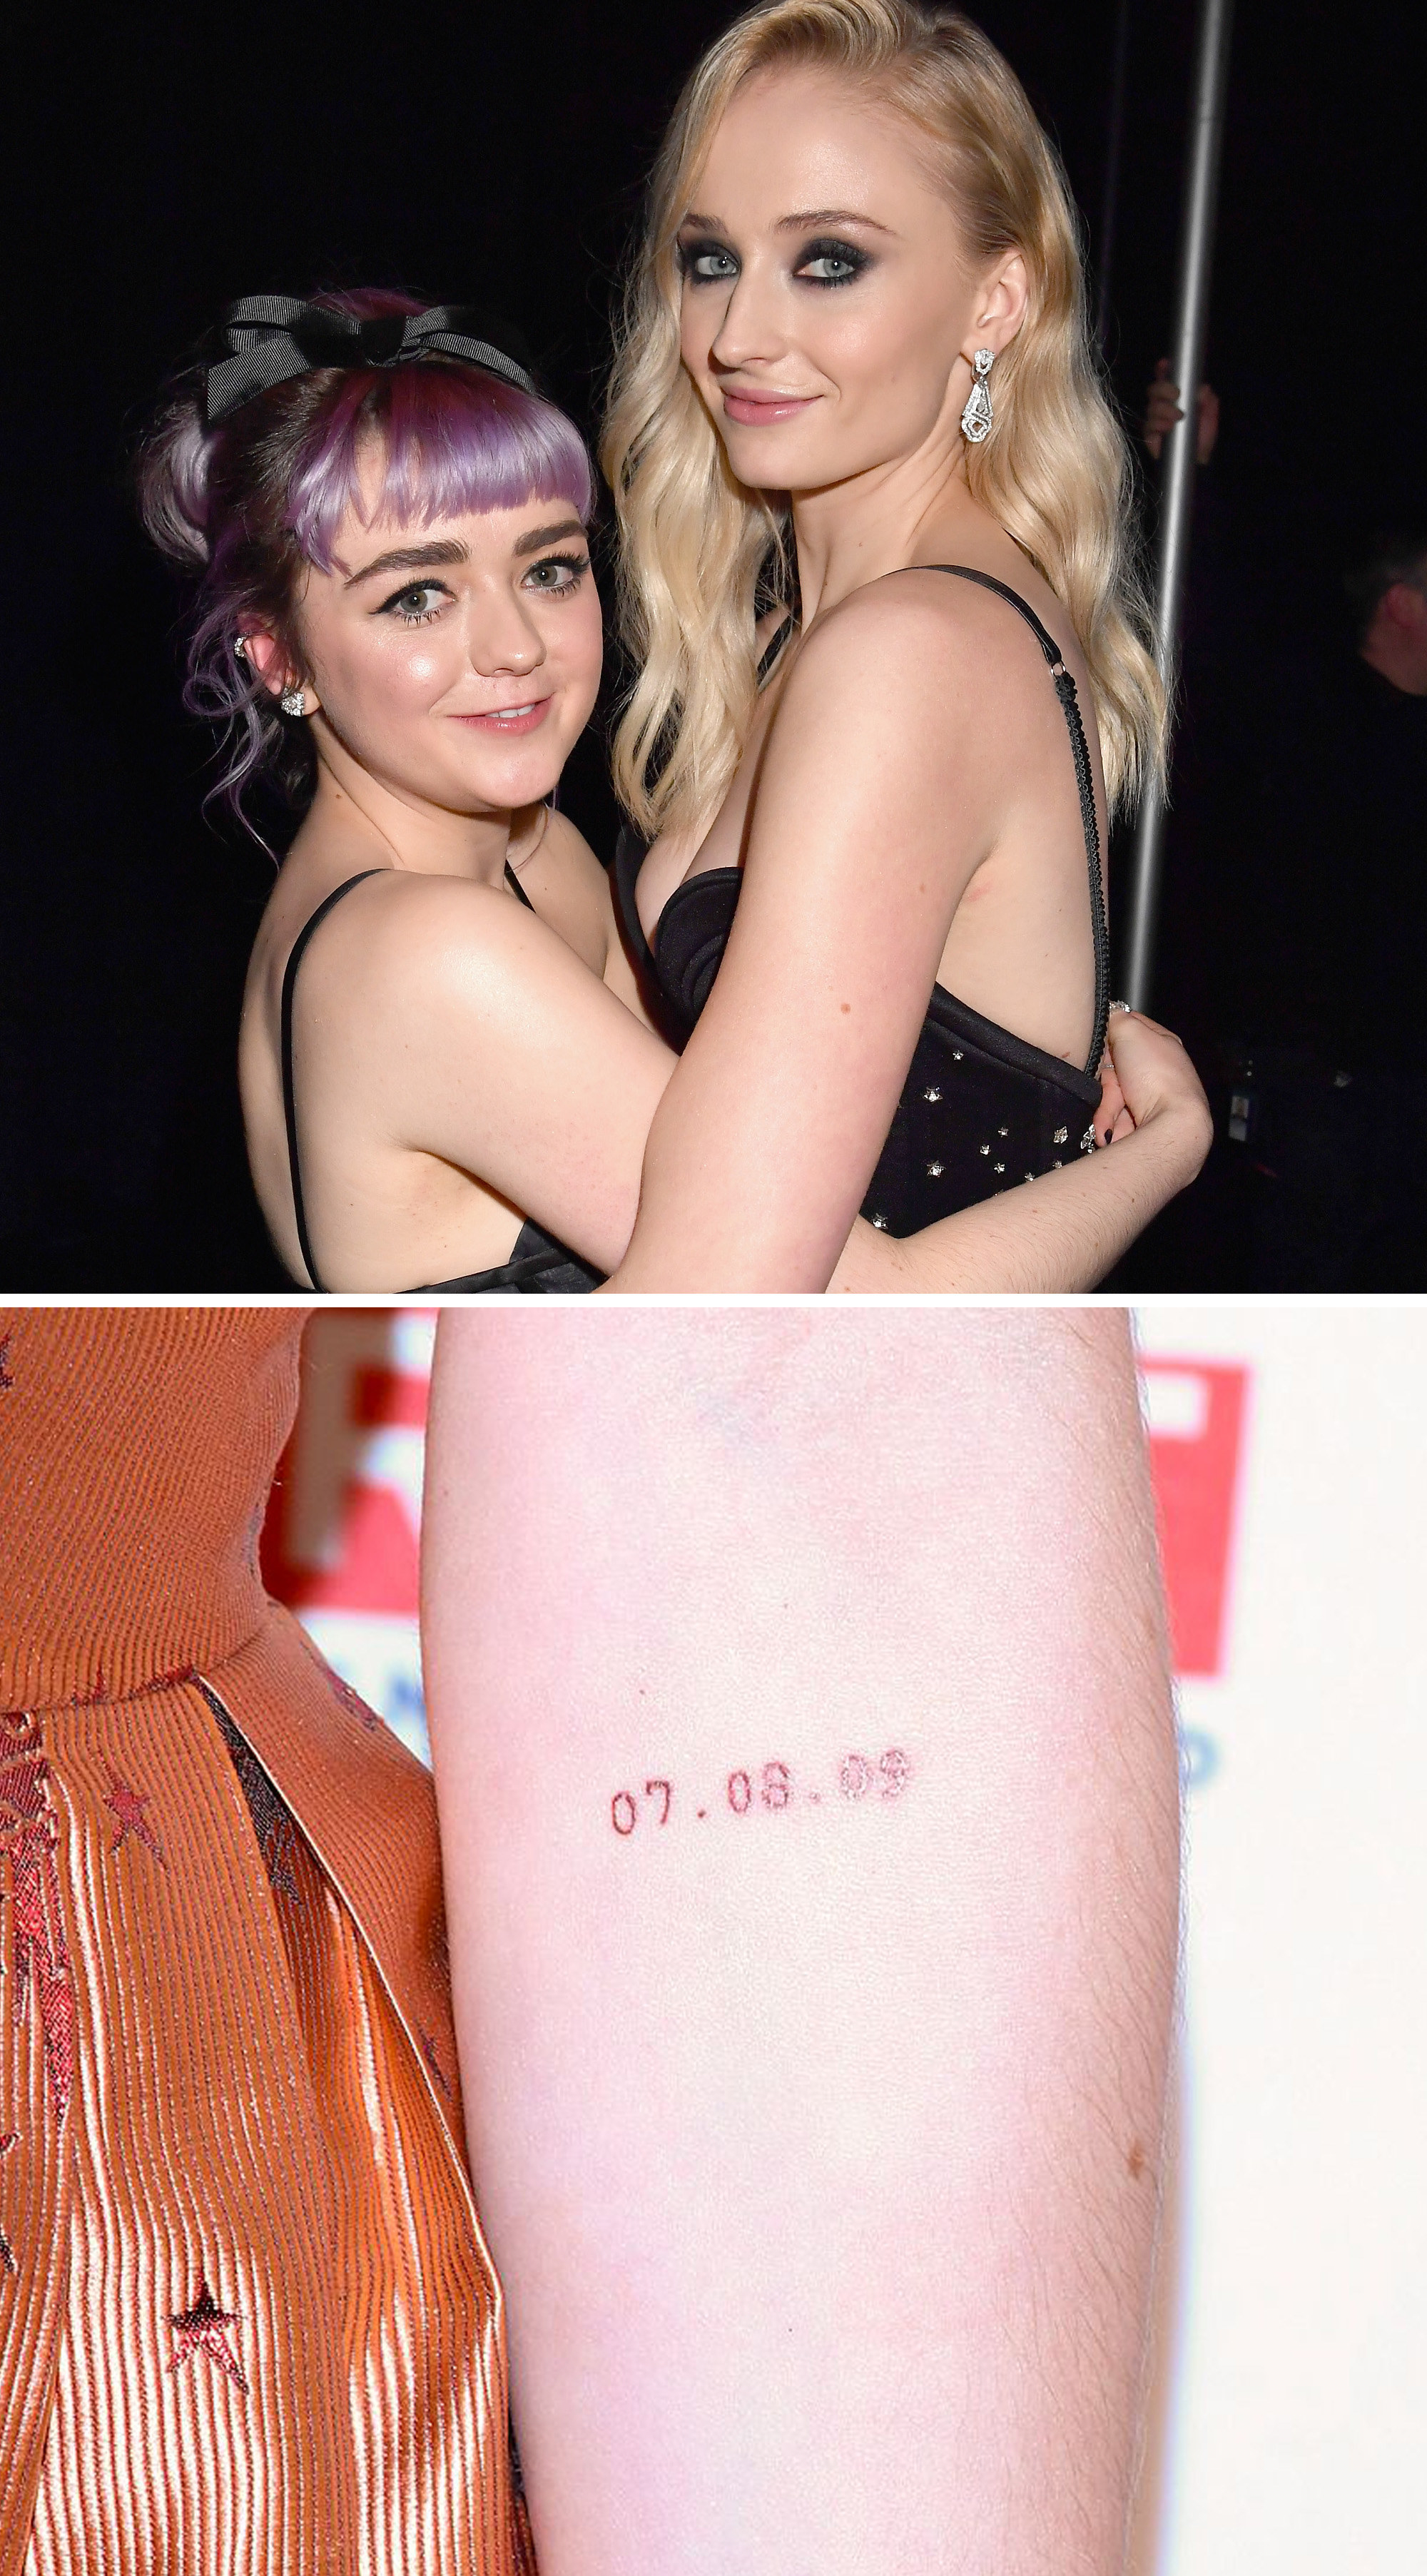 Sophie and Maisie hugging and a close-up of Maisie&#x27;s tattoo that says, &quot;07. 08. 09&quot;